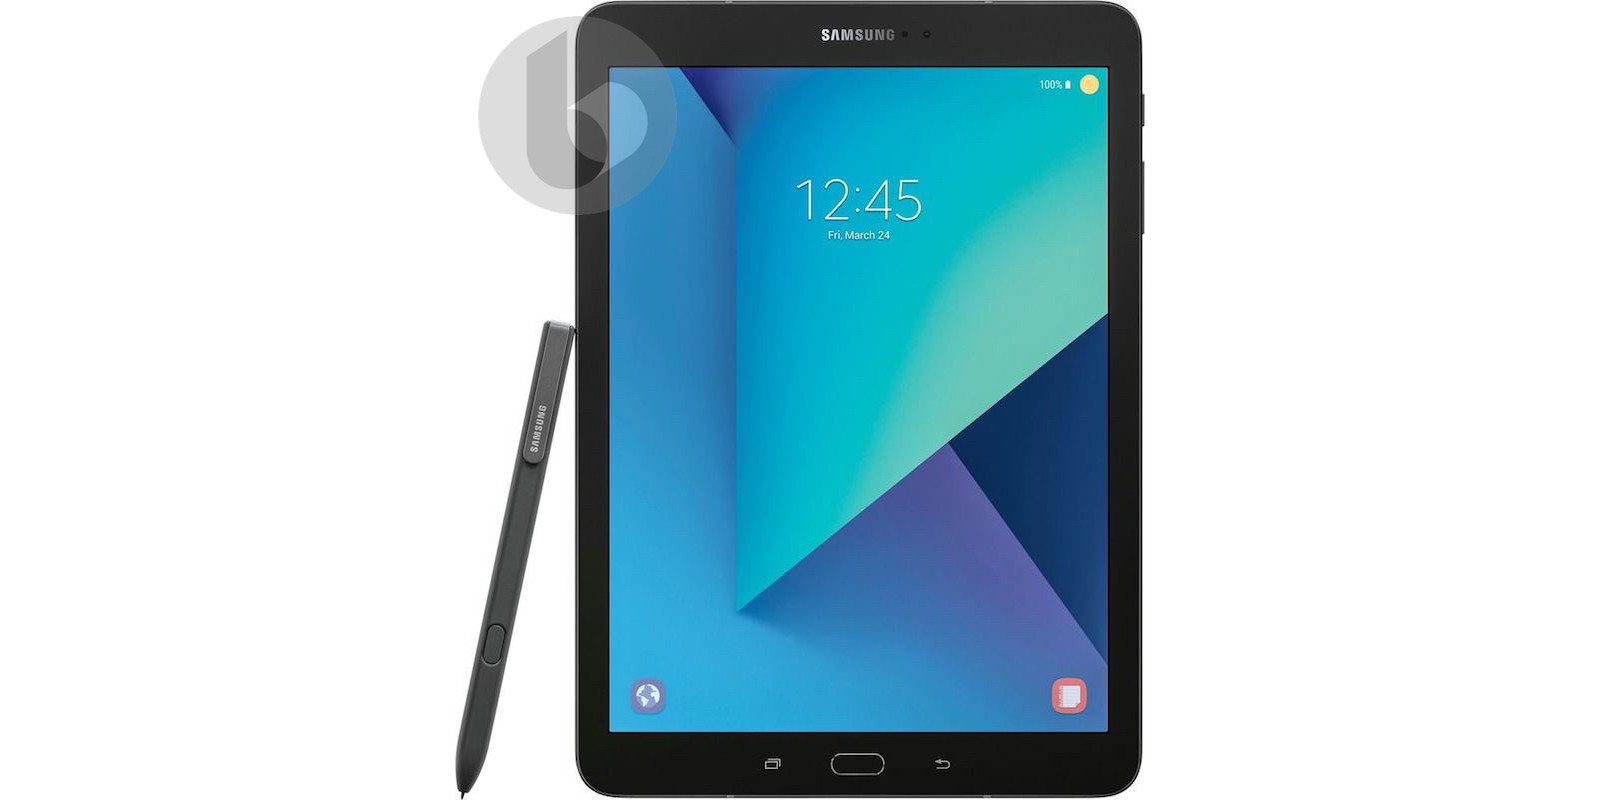 samsung galaxy tab s3 leaked images confirm akg audio and stylus support 513262 2